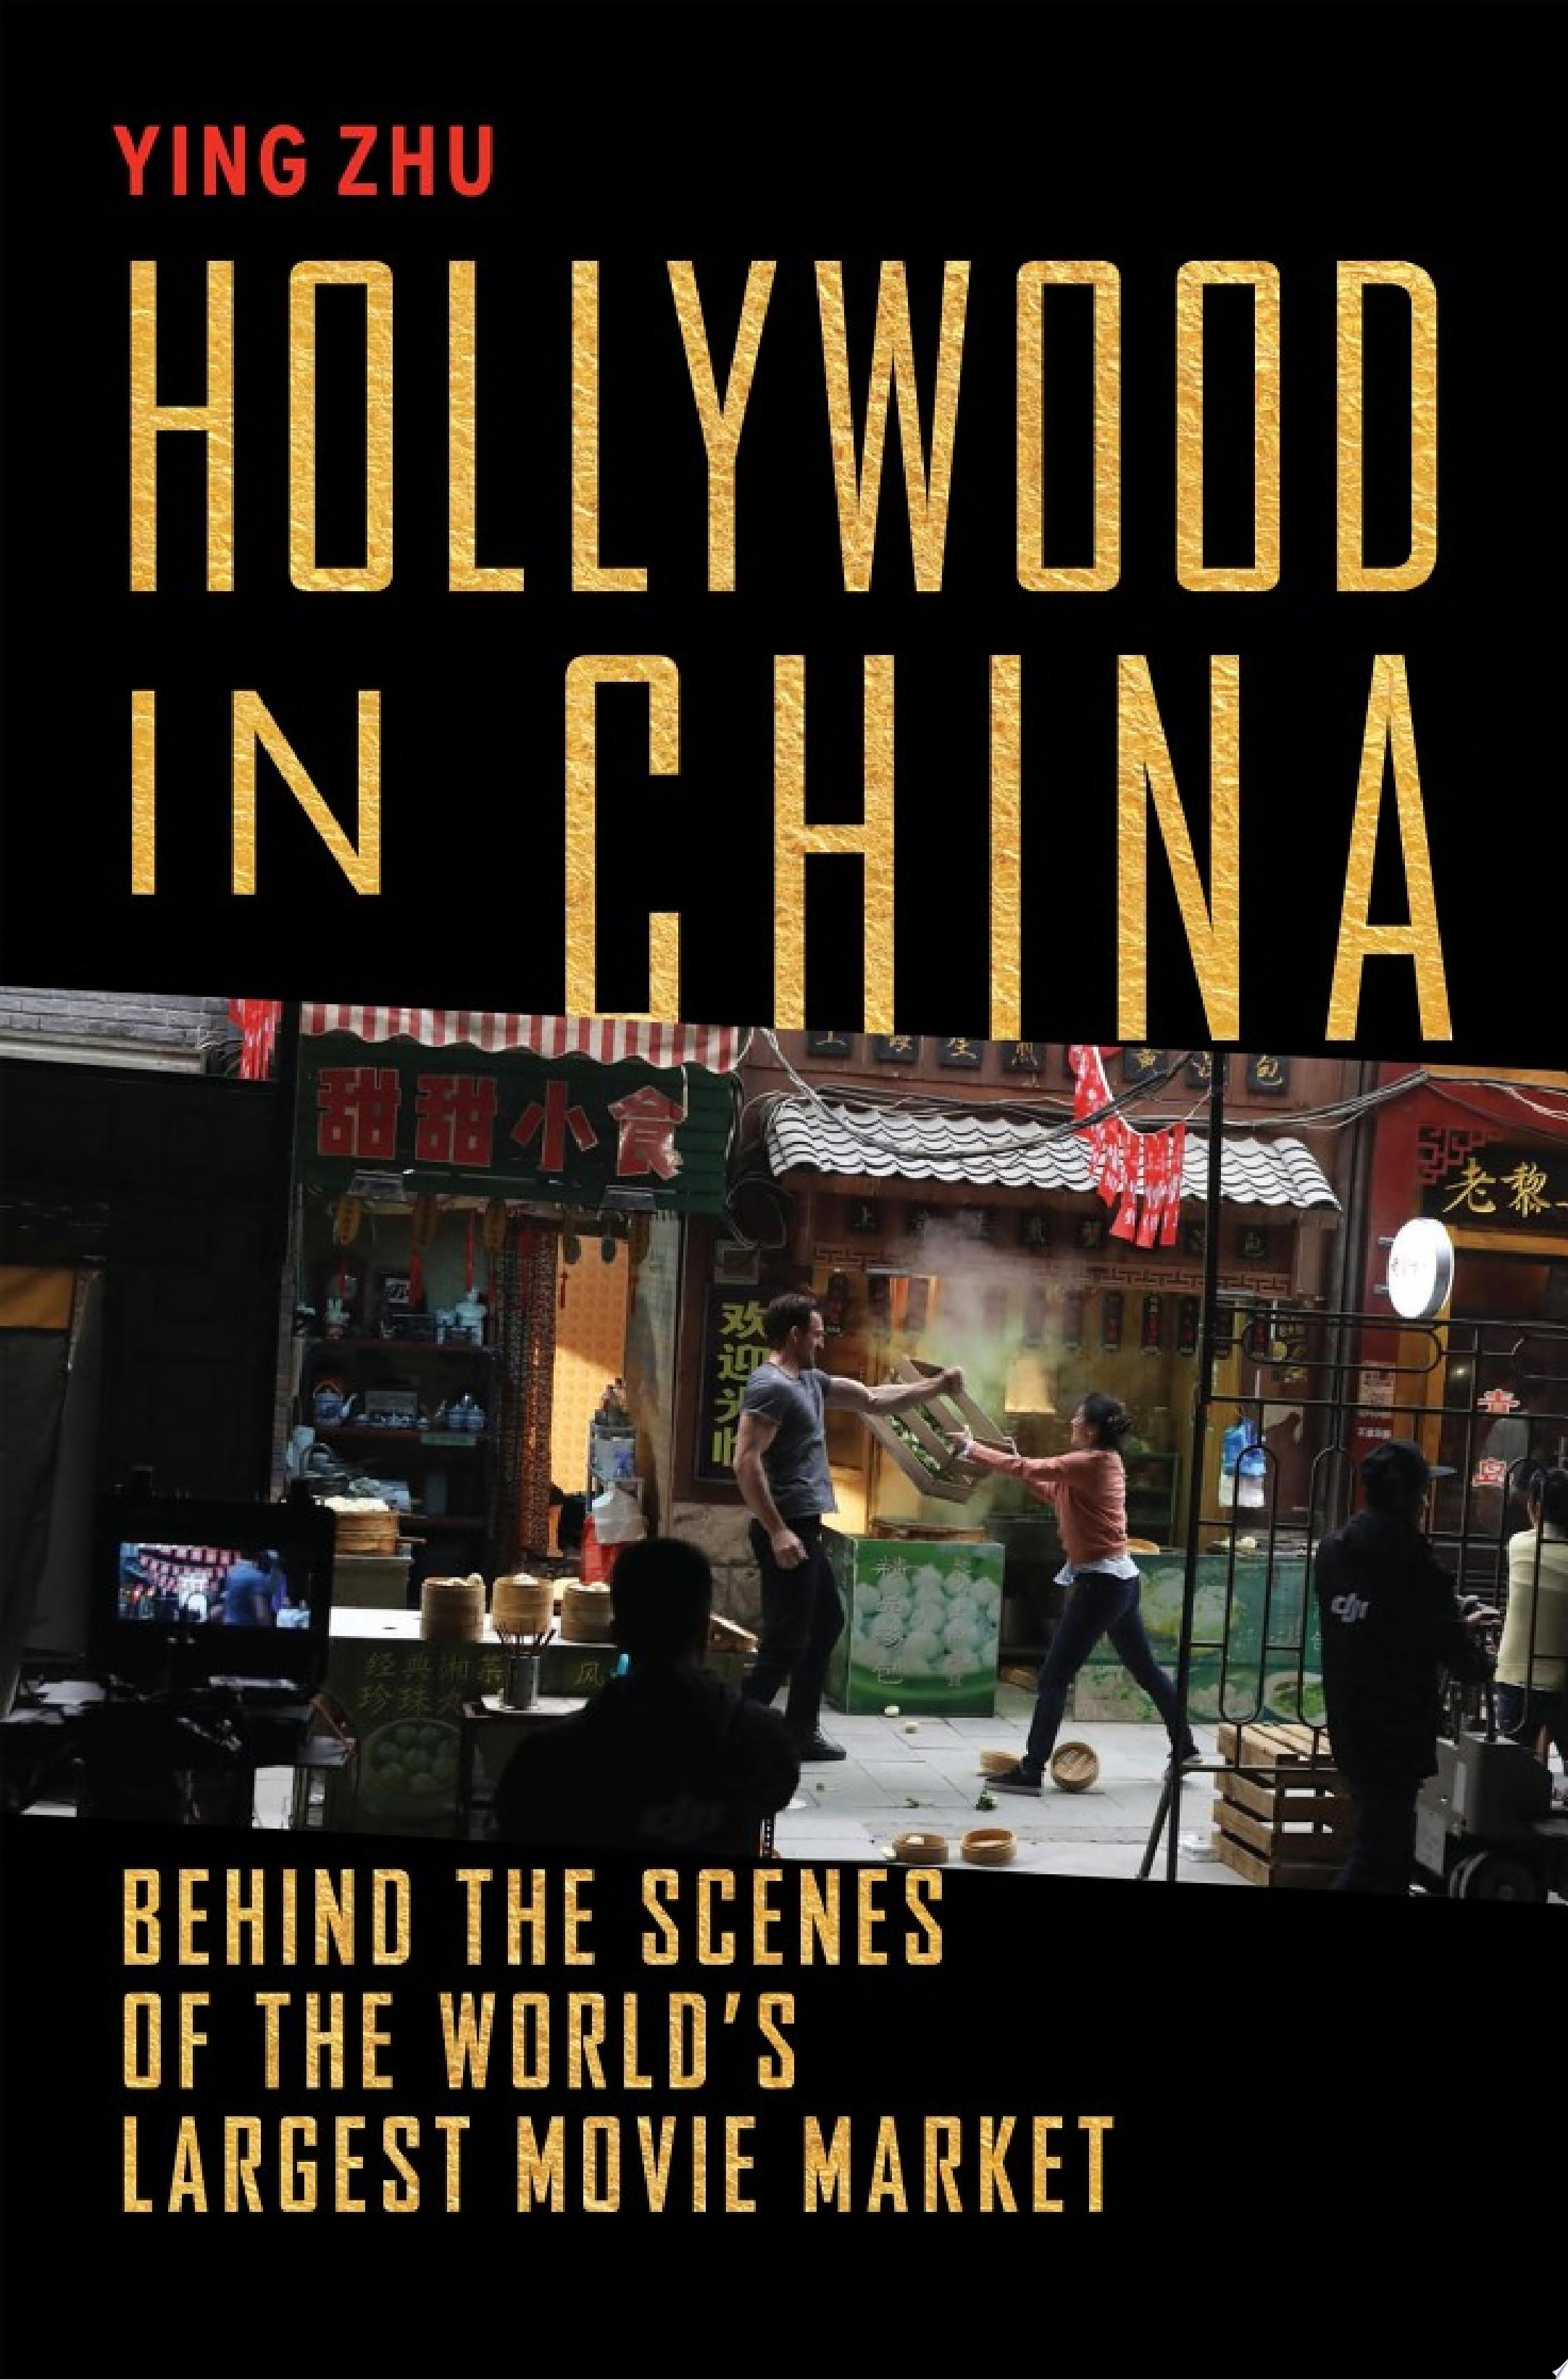 Image for "Hollywood in China"